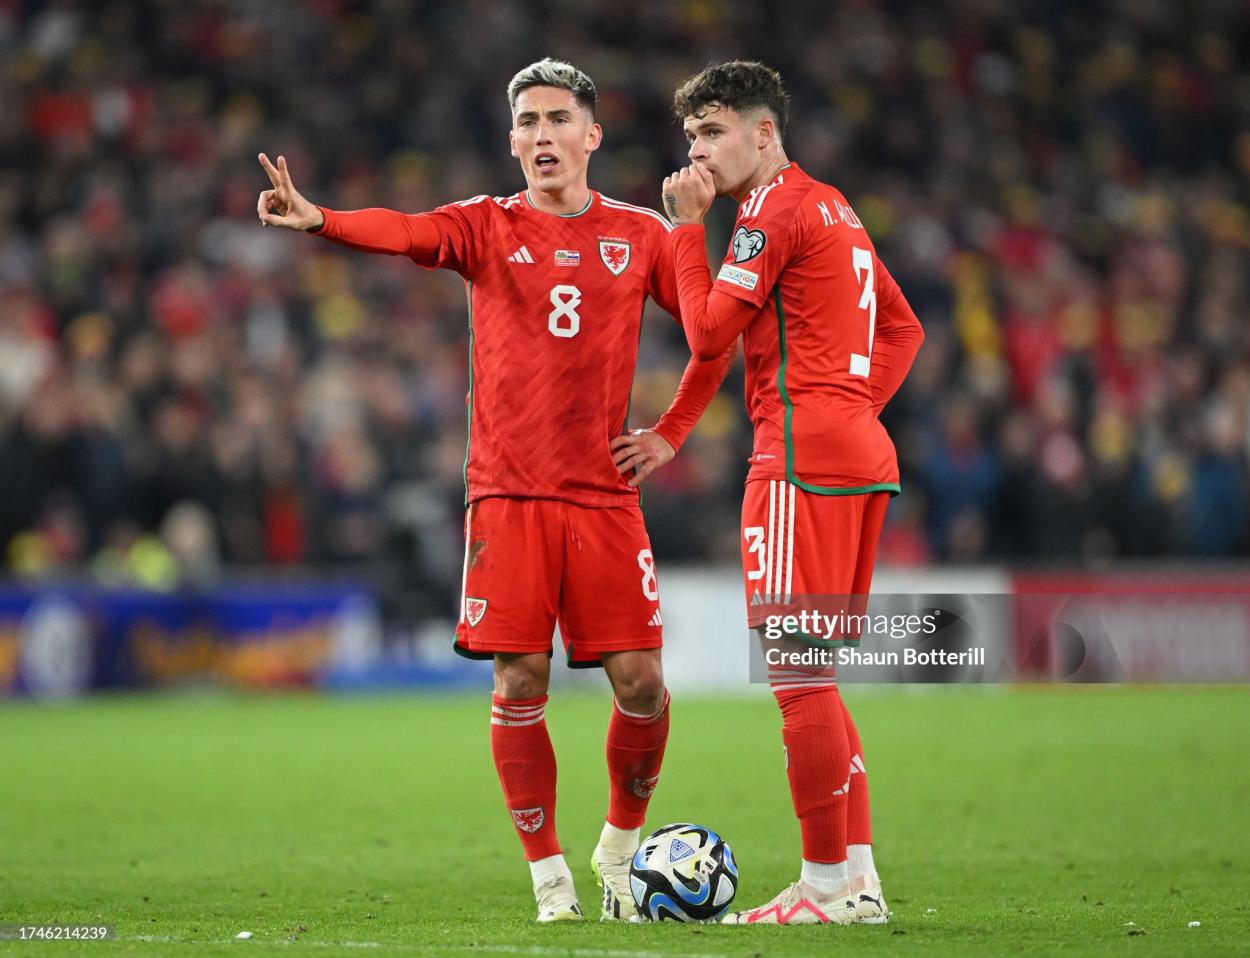 Harry Wilson and Neco Williams of Wales prepare to take a free kick during the UEFA EURO 2024 European qualifier match between Wales and Croatia at Cardiff City Stadium on October 15, 2023 in Cardiff, Wales. (Photo by Shaun Botterill/Getty Images)